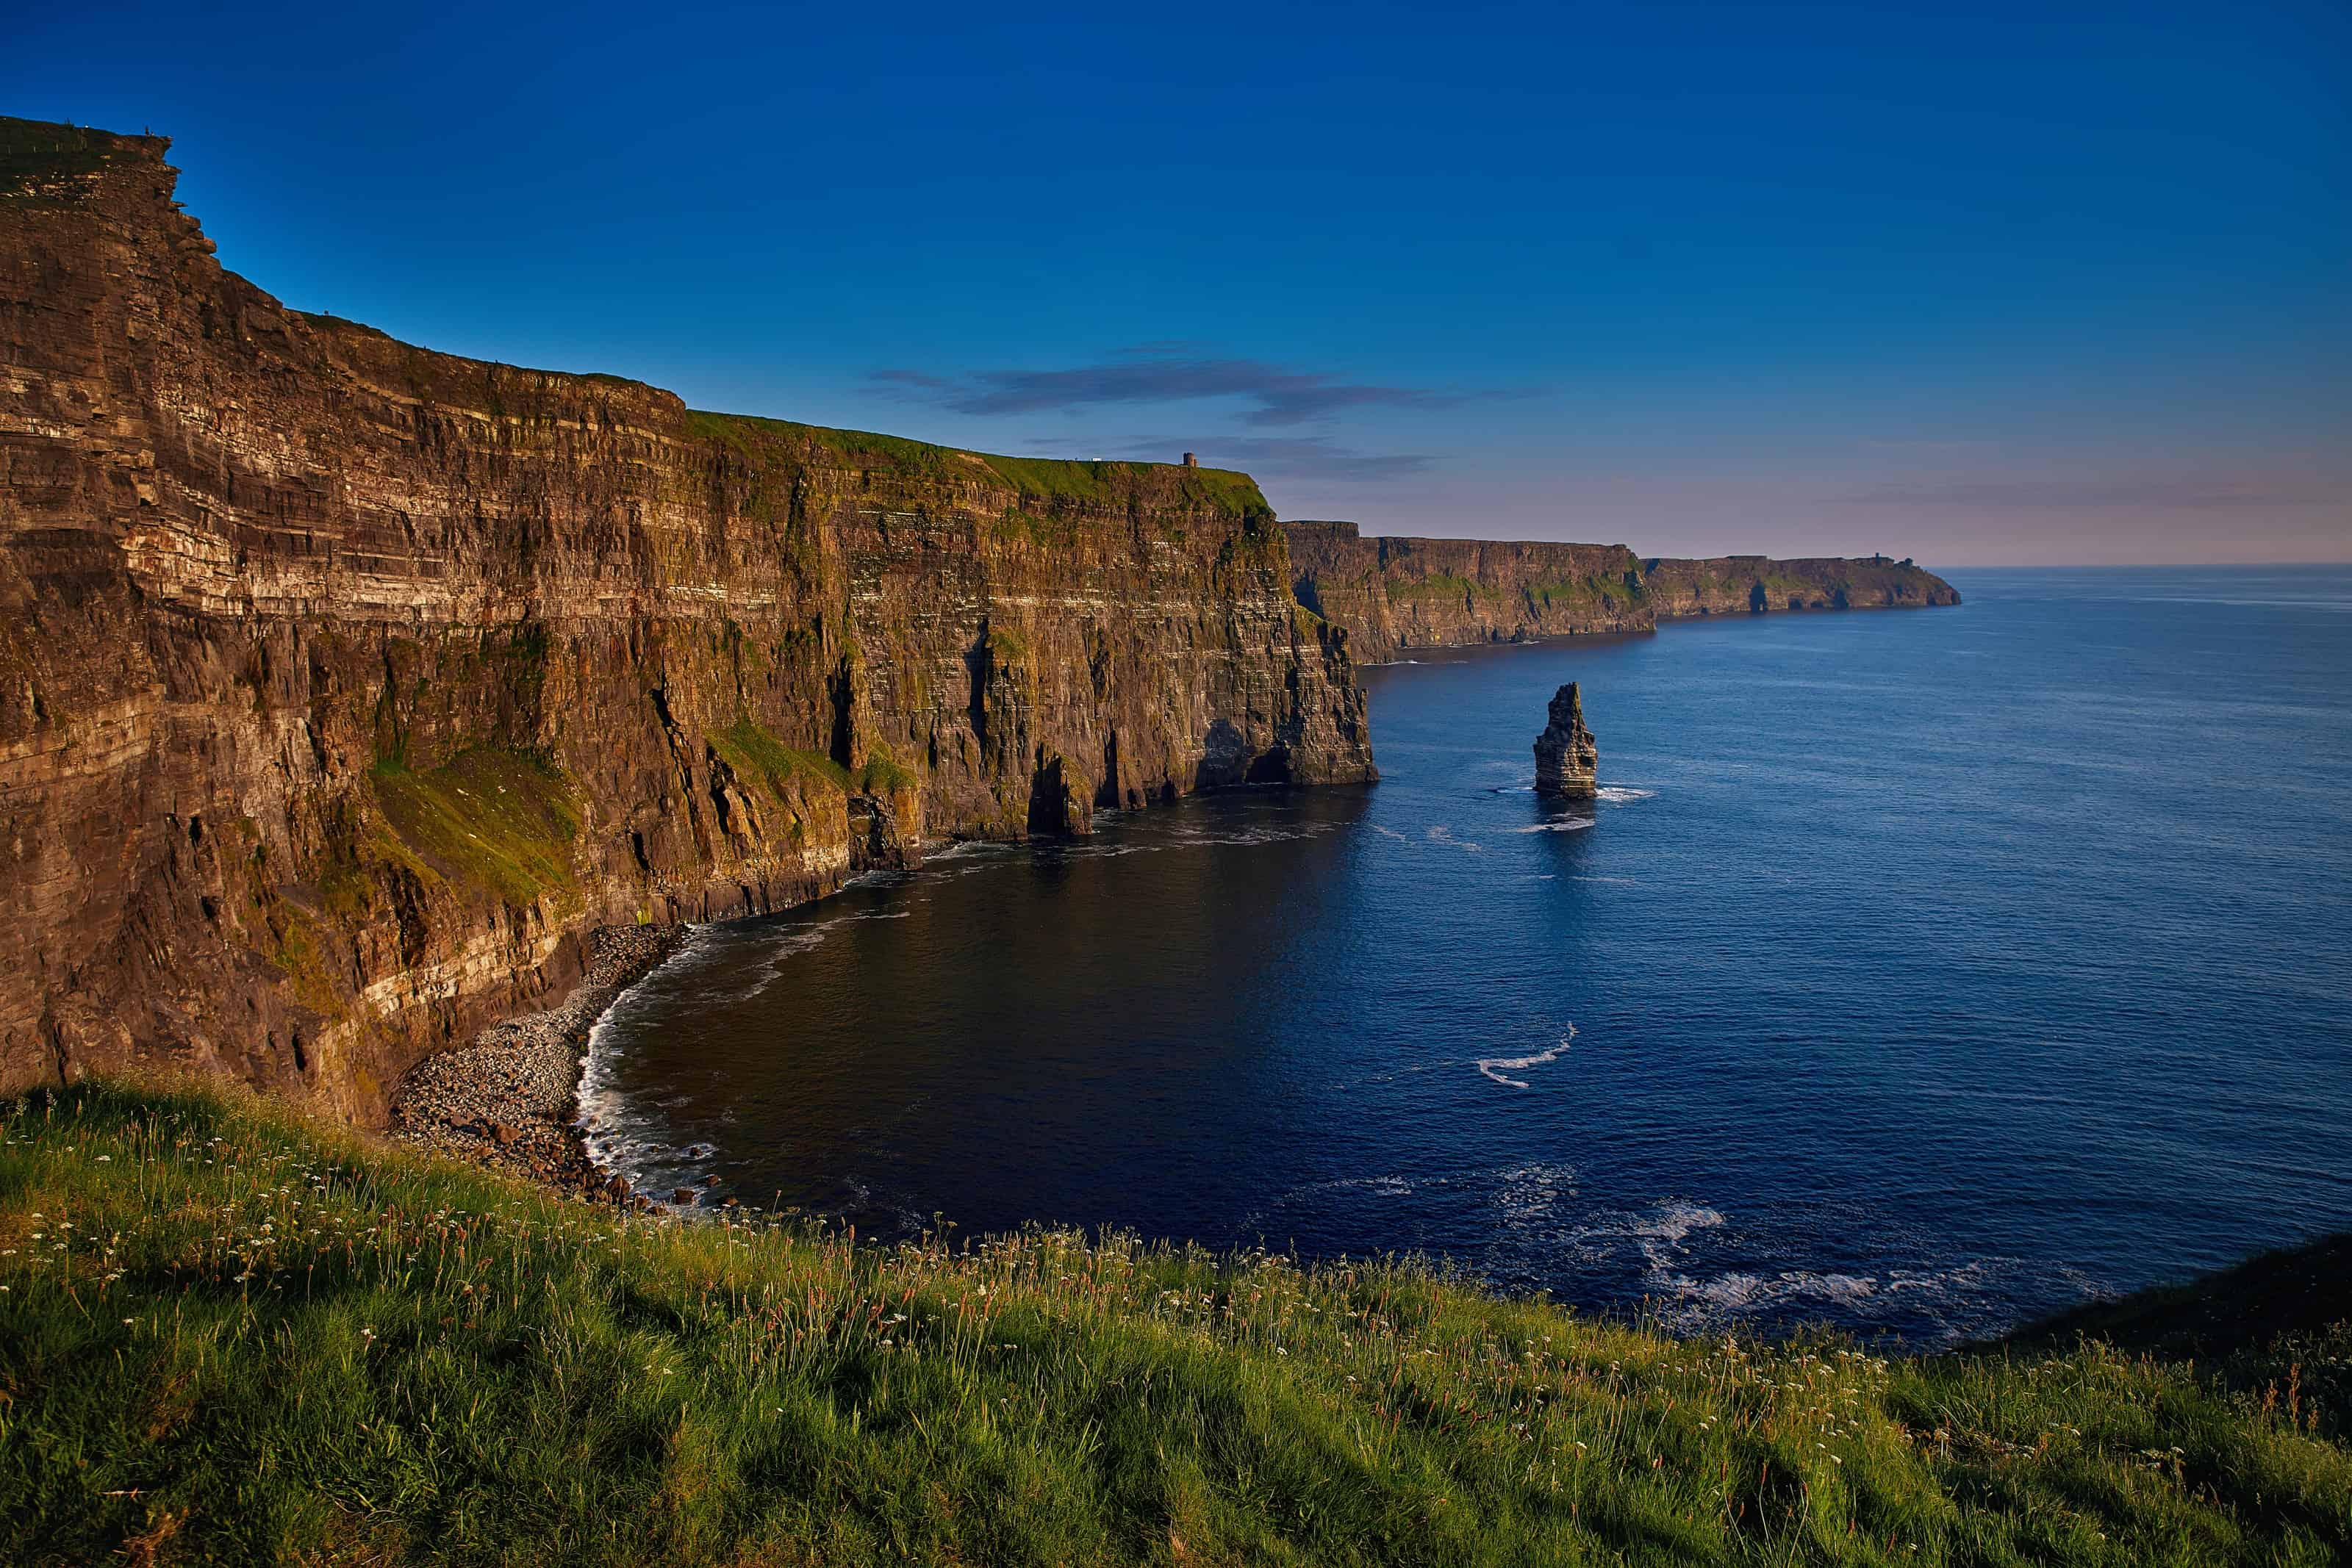 visit the cliffs of moher at sunset on your ireland road trip